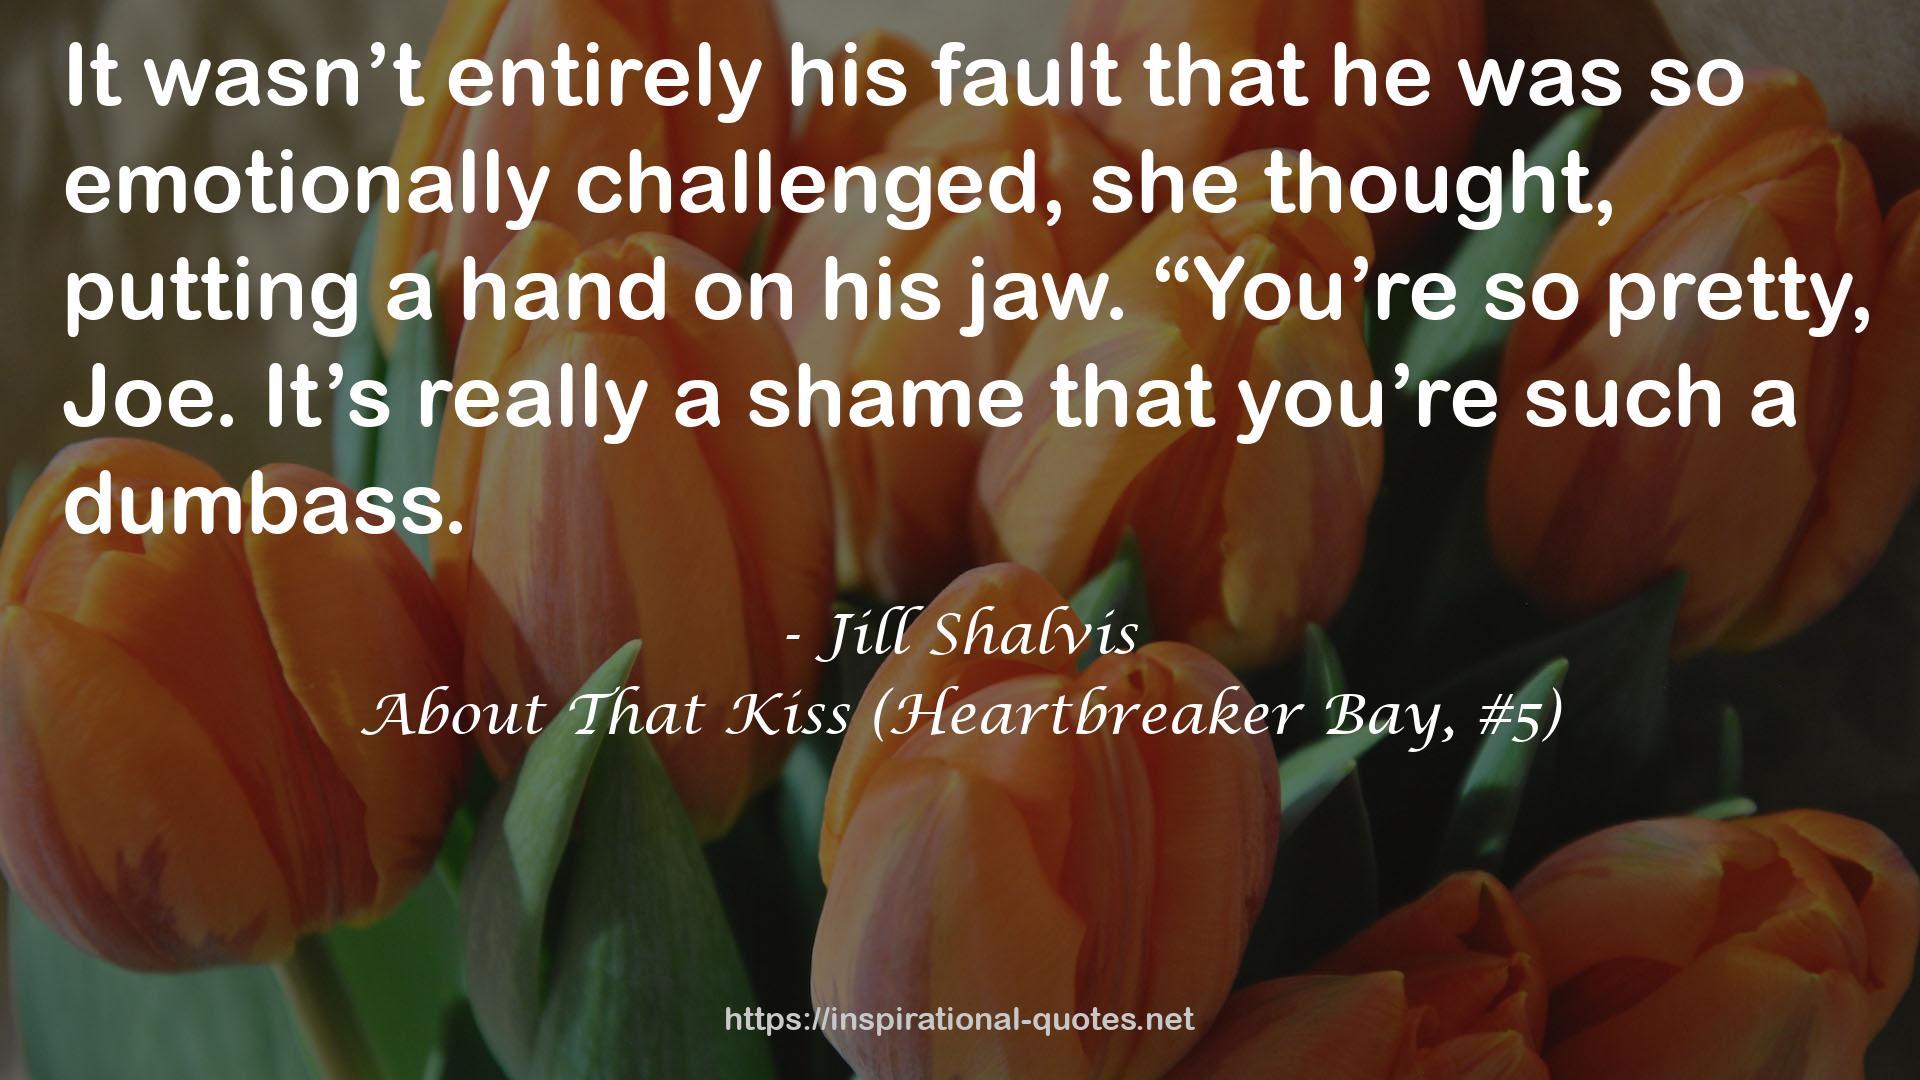 About That Kiss (Heartbreaker Bay, #5) QUOTES